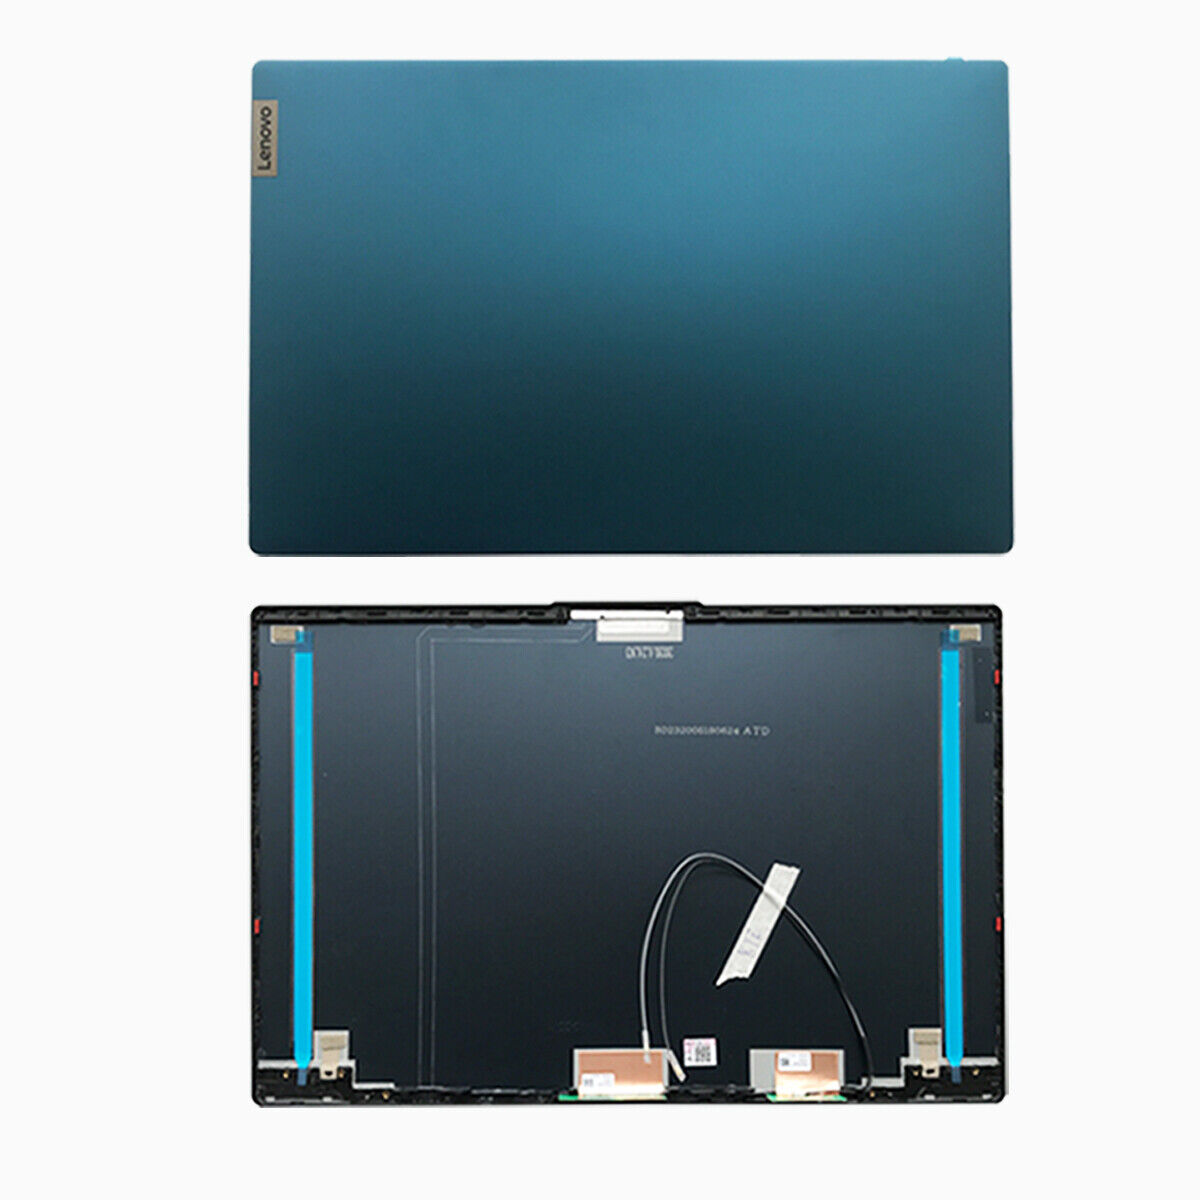 For Lenovo ideapad 5 15ITL05 15IIL05 15ARE05 LCD Back Cover/Front Bezel/Hinge US